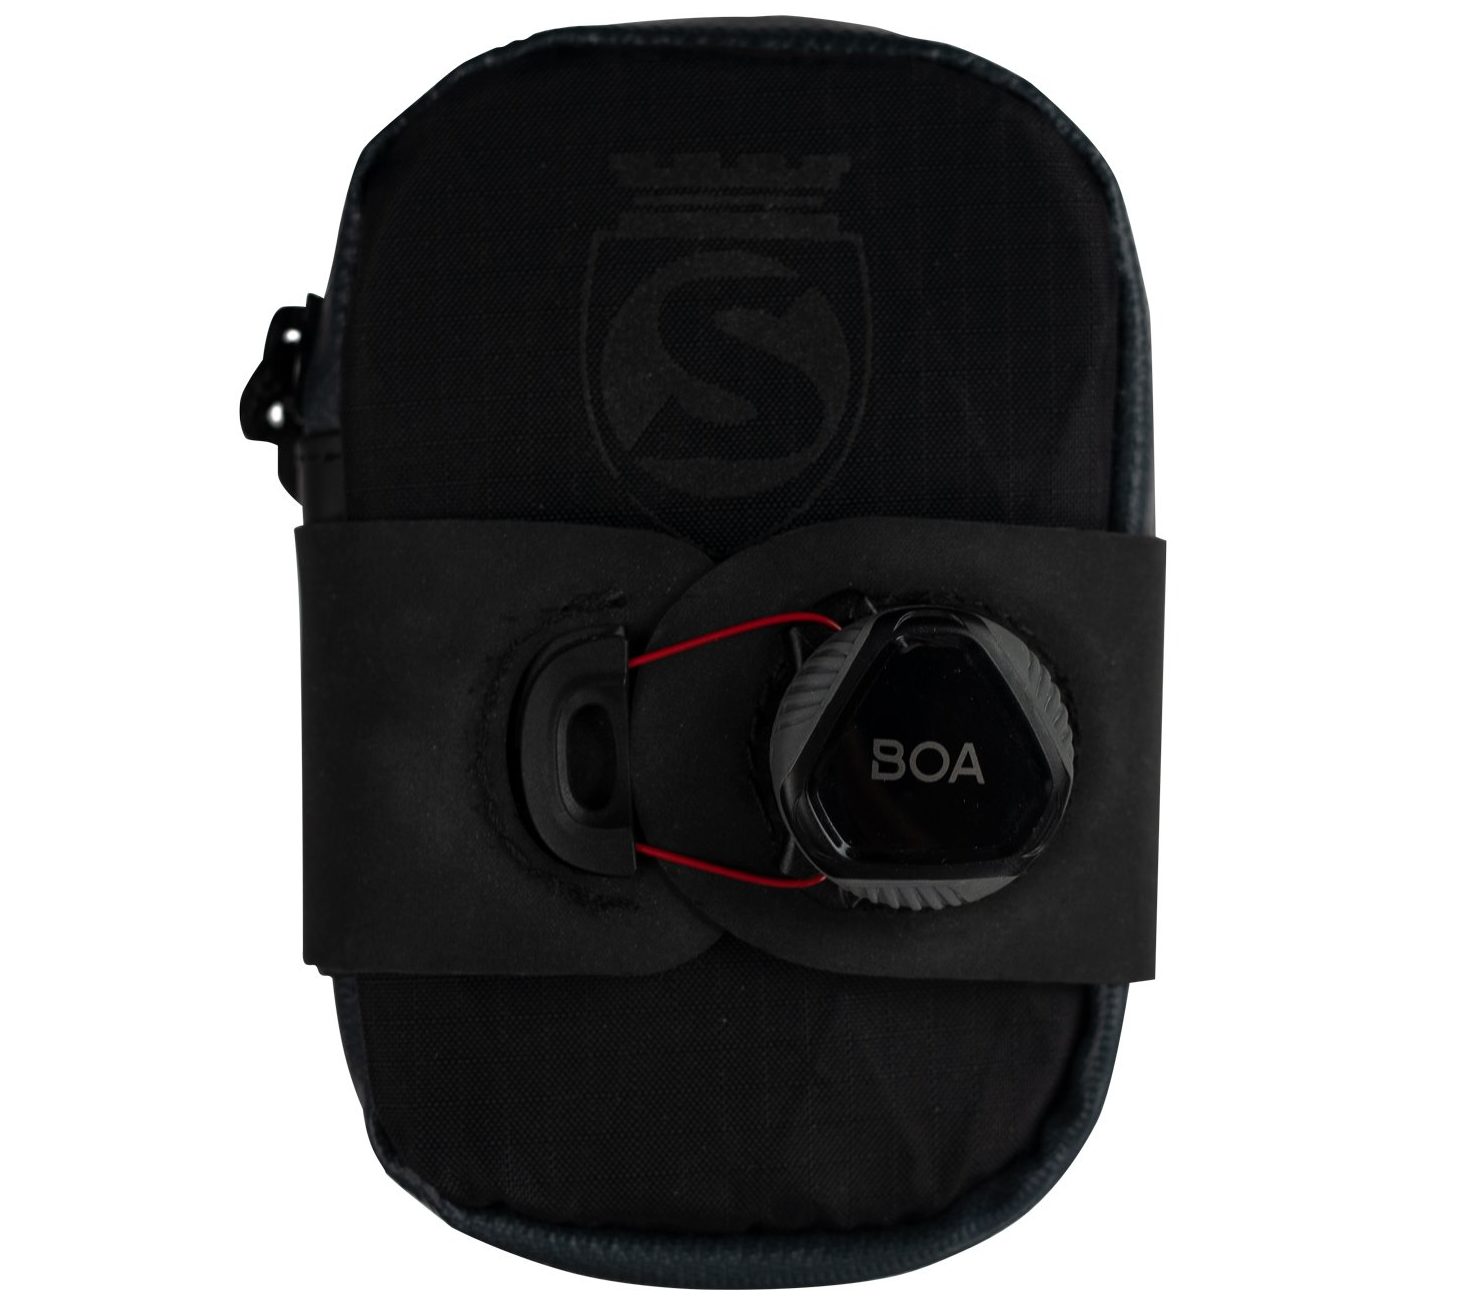 Silca adds smaller BOA Bag with compact Mattone Seat Pack for all bikes